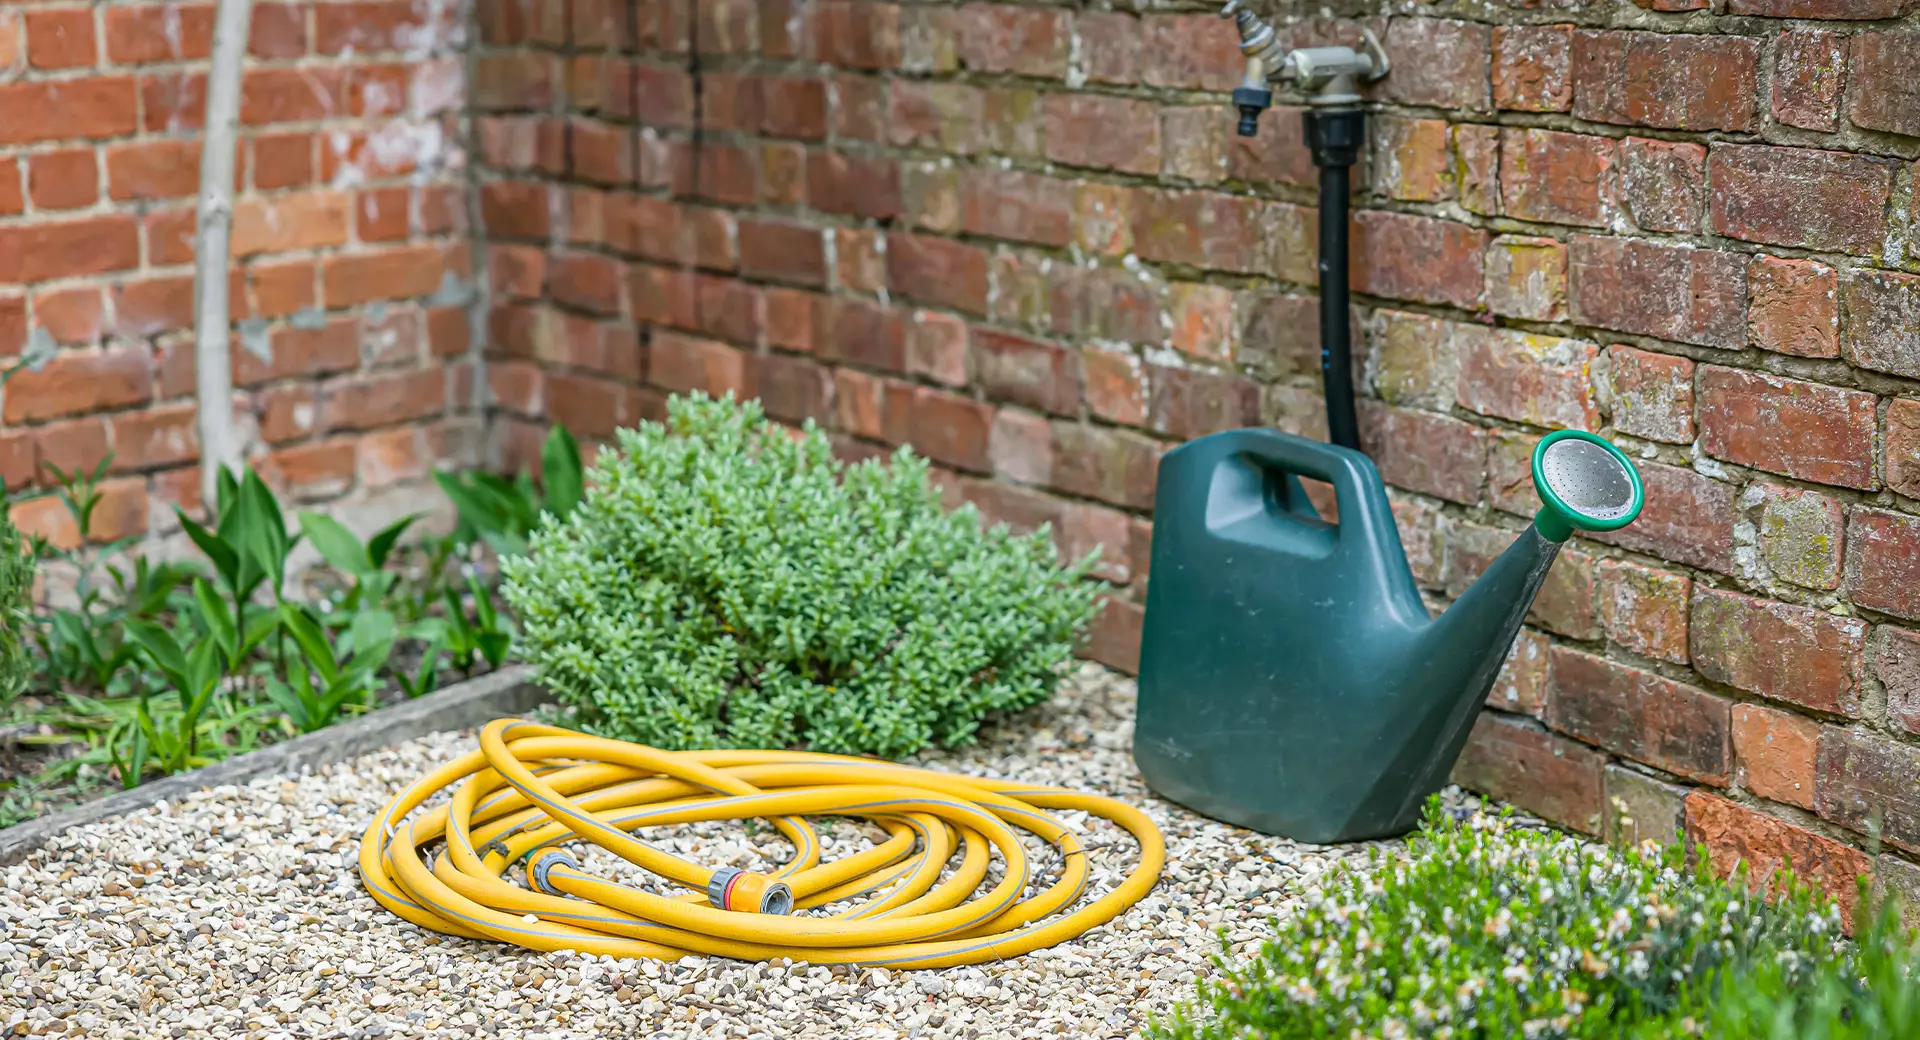 A watering can beside a hose in a garden